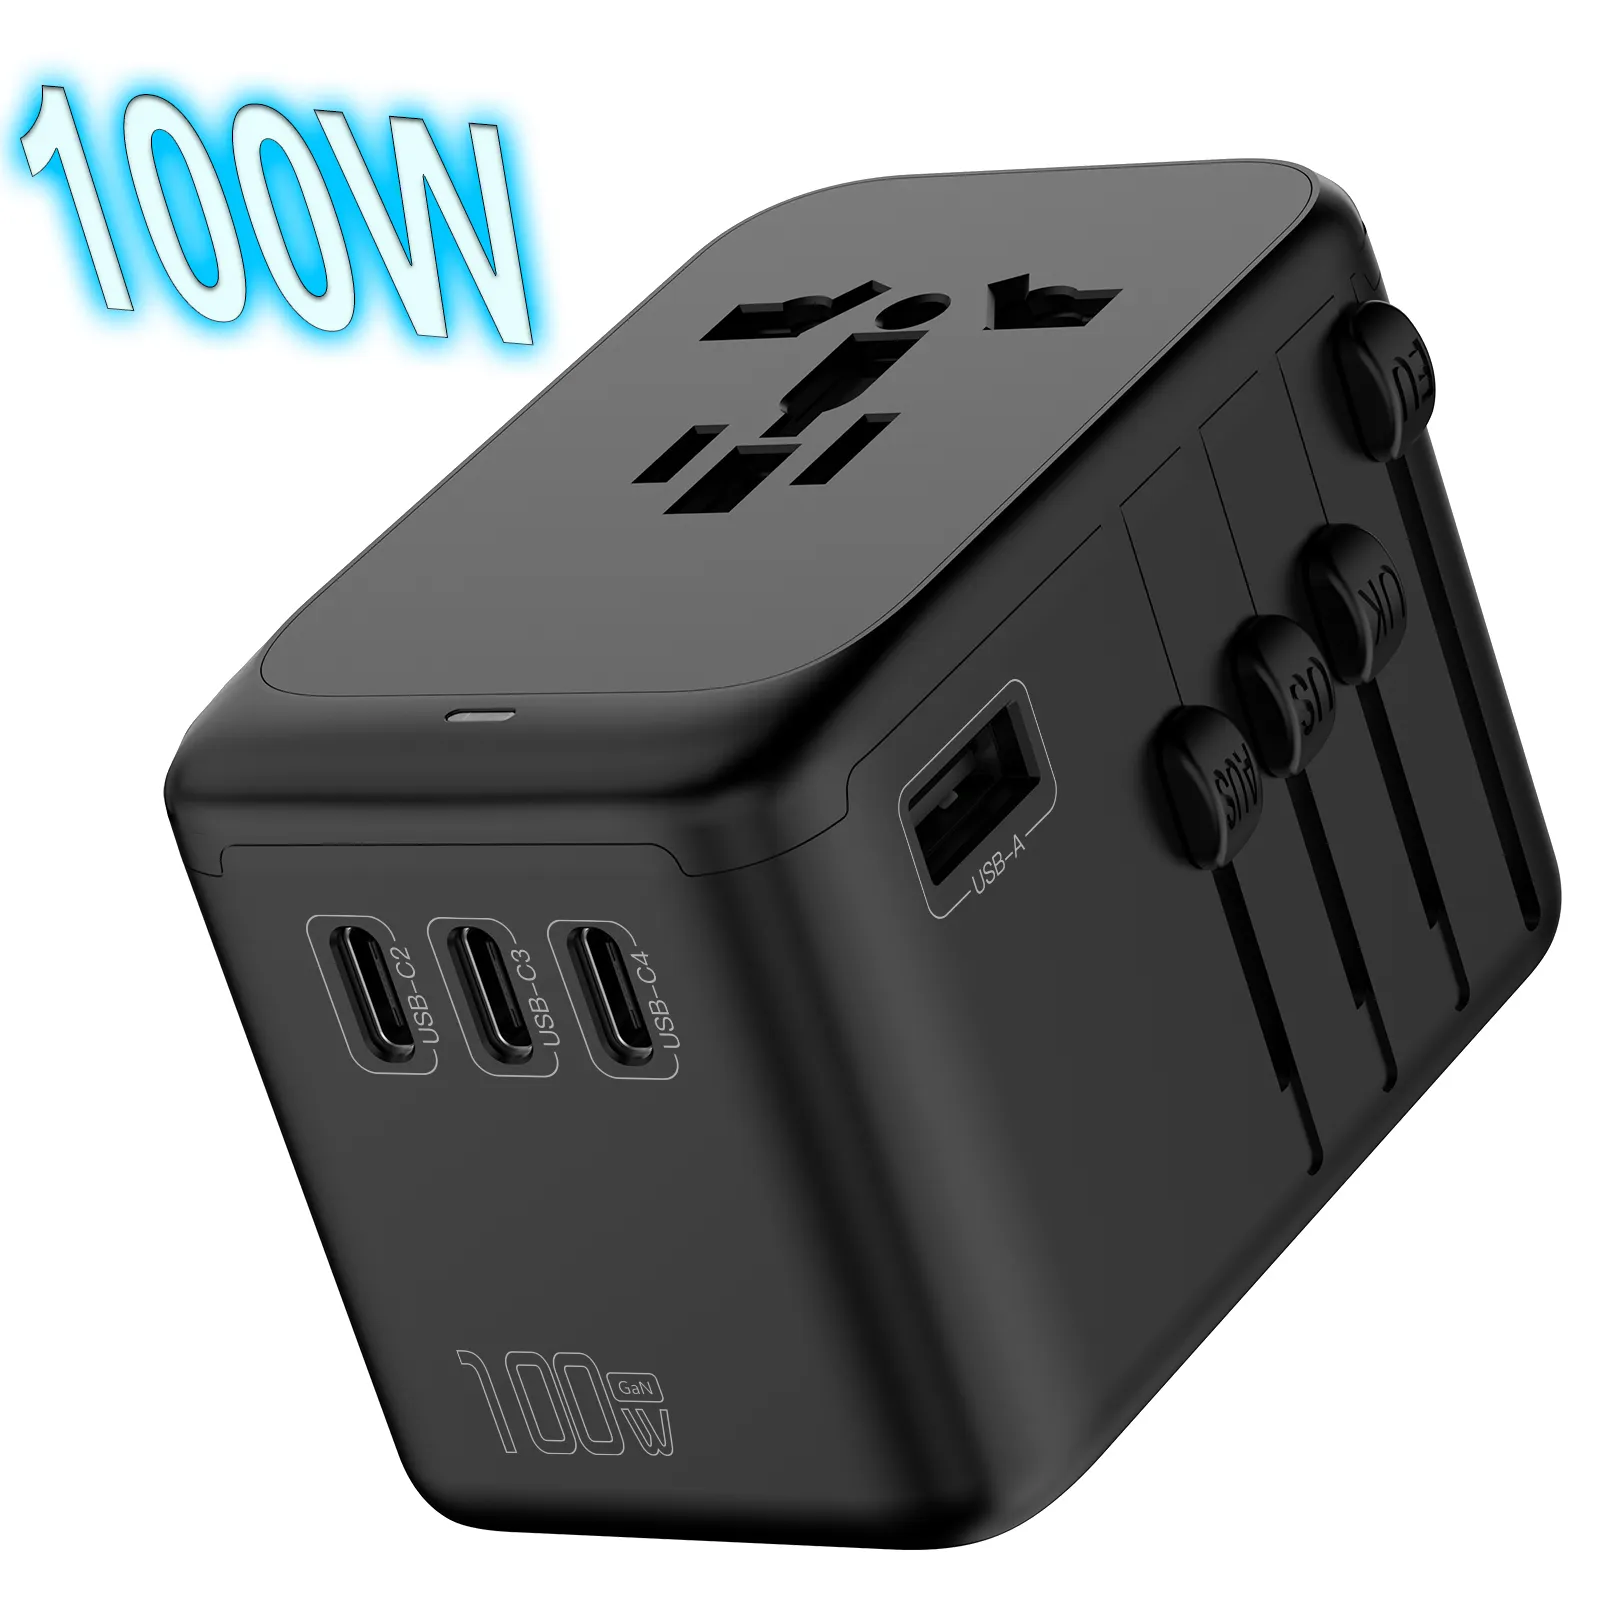 100W Super fast charging world international universal travel adapter power extension con usb e type-c